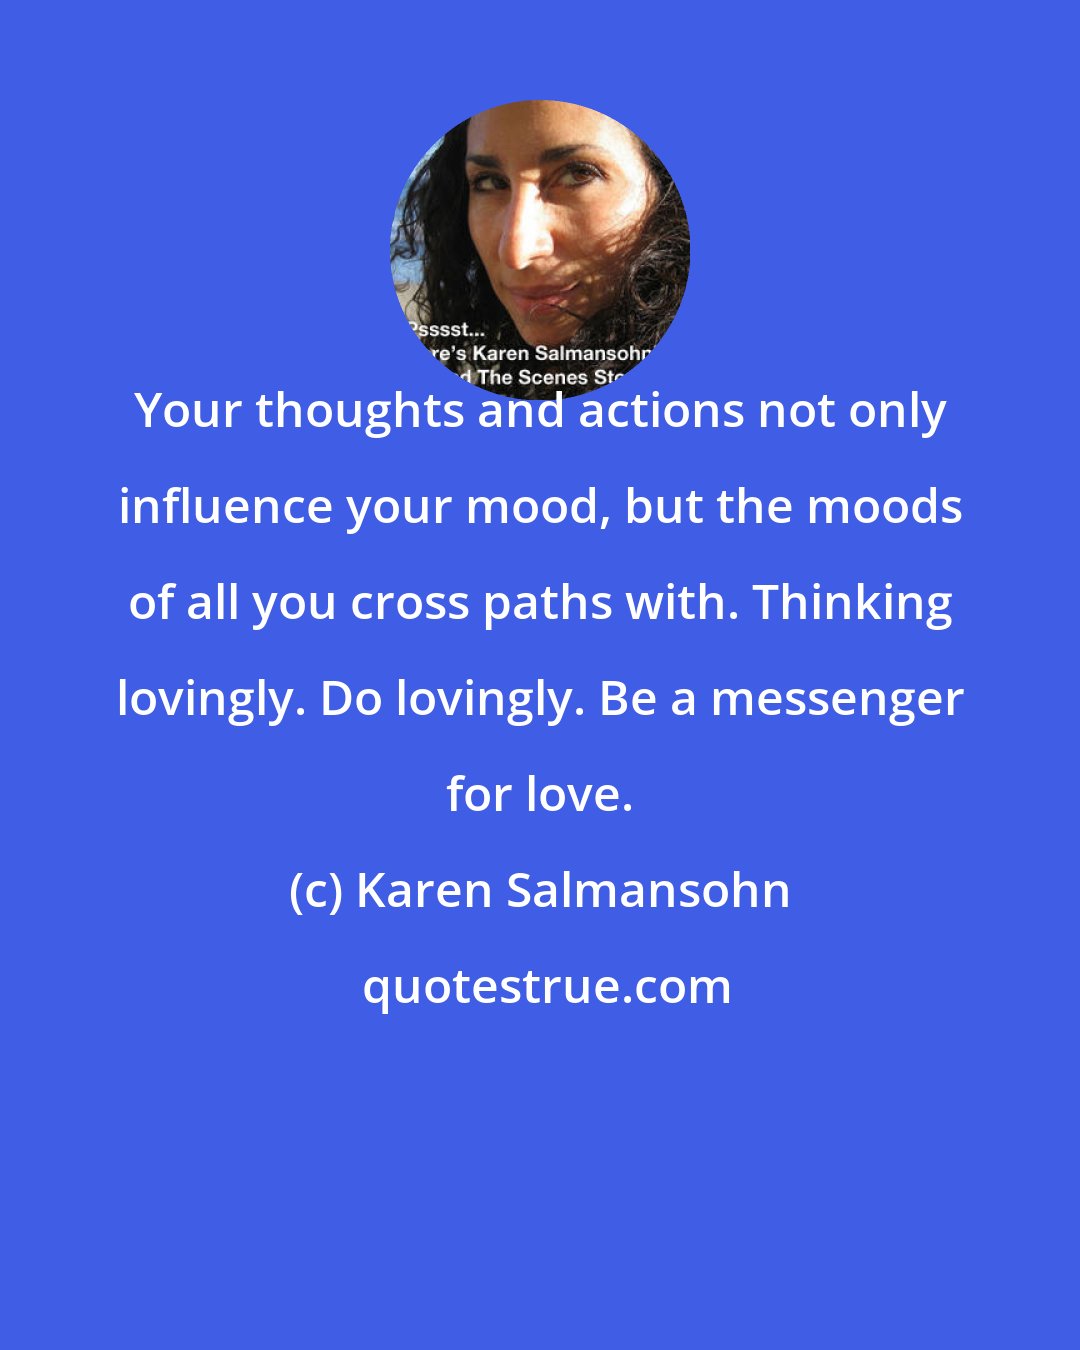 Karen Salmansohn: Your thoughts and actions not only influence your mood, but the moods of all you cross paths with. Thinking lovingly. Do lovingly. Be a messenger for love.